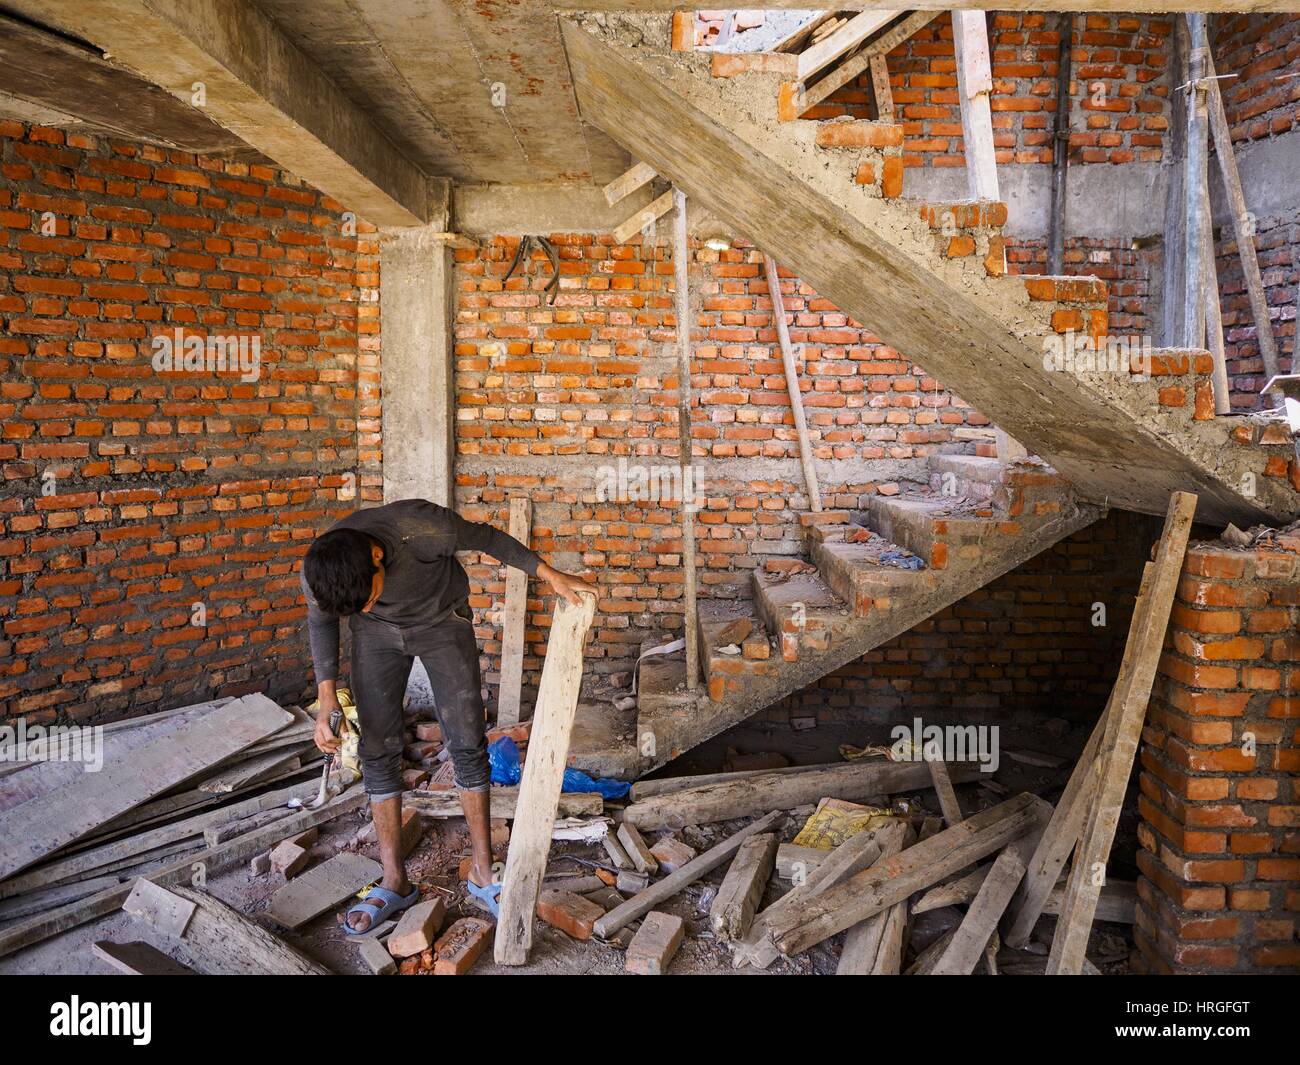 Sankhu, Central Development Region, Nepal. 2nd Mar, 2017. A construction worker scavenges wood for a home he is working in Sankhu. Many of the homes are being rebuilt with materials scavenged from buildings destroyed in the 2015 earthquake, There is more construction and rebuilding going on in Sankhu, west of central Kathmandu, than in many other parts of the Kathmandu Valley nearly two years after the earthquake of 25 April 2015 that devastated Nepal. In some villages in the Kathmandu valley workers are working by hand to remove ruble and dig out destroyed buildings. About 9,000 people were Stock Photo